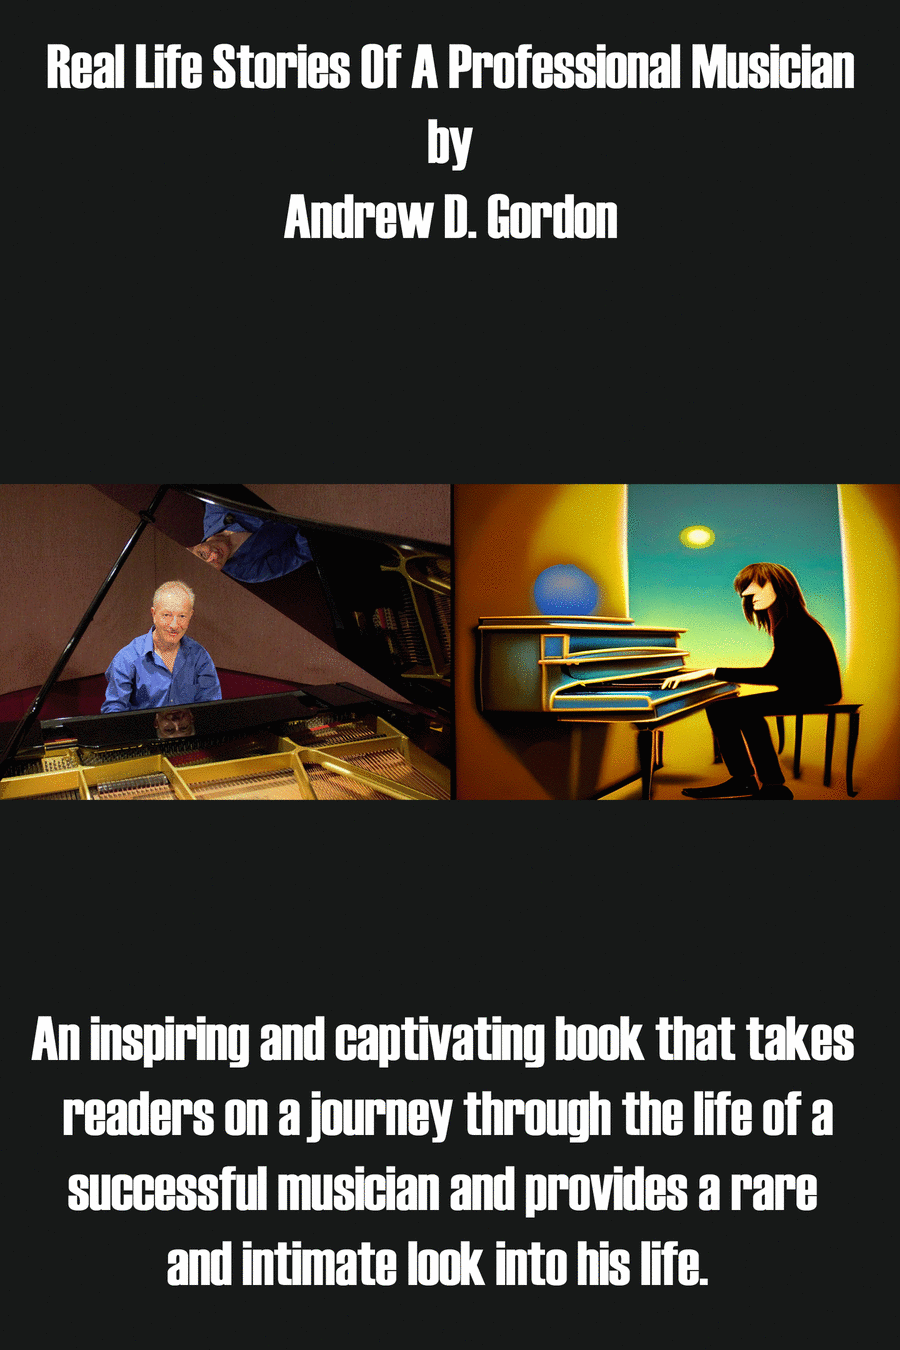 Real Life Stories of A Professional Musician